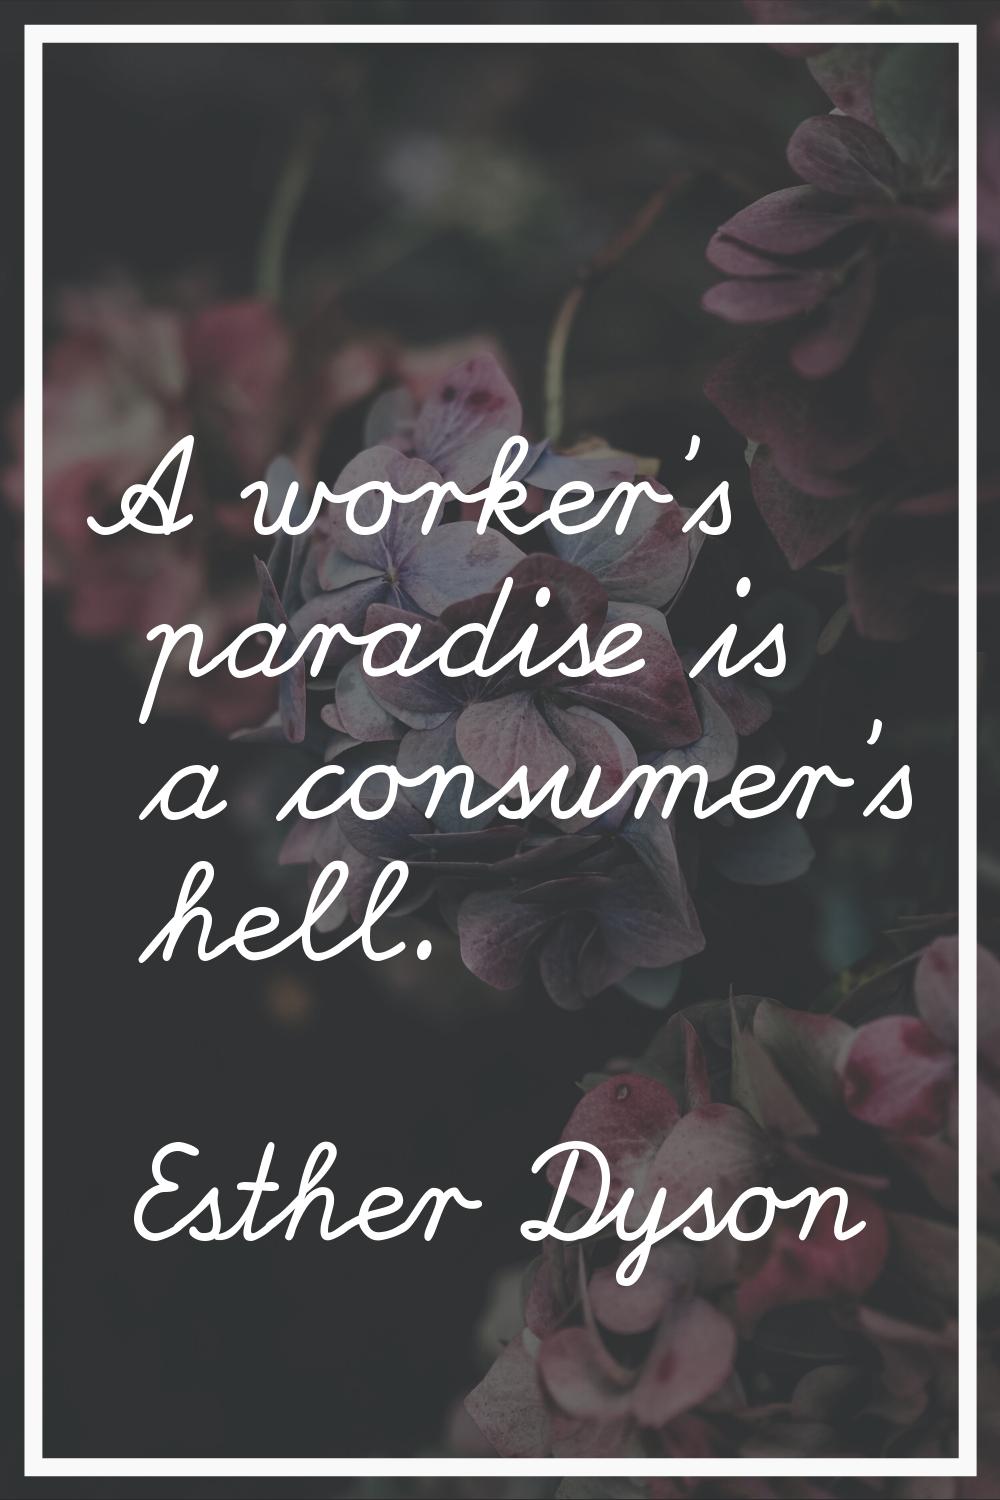 A worker's paradise is a consumer's hell.